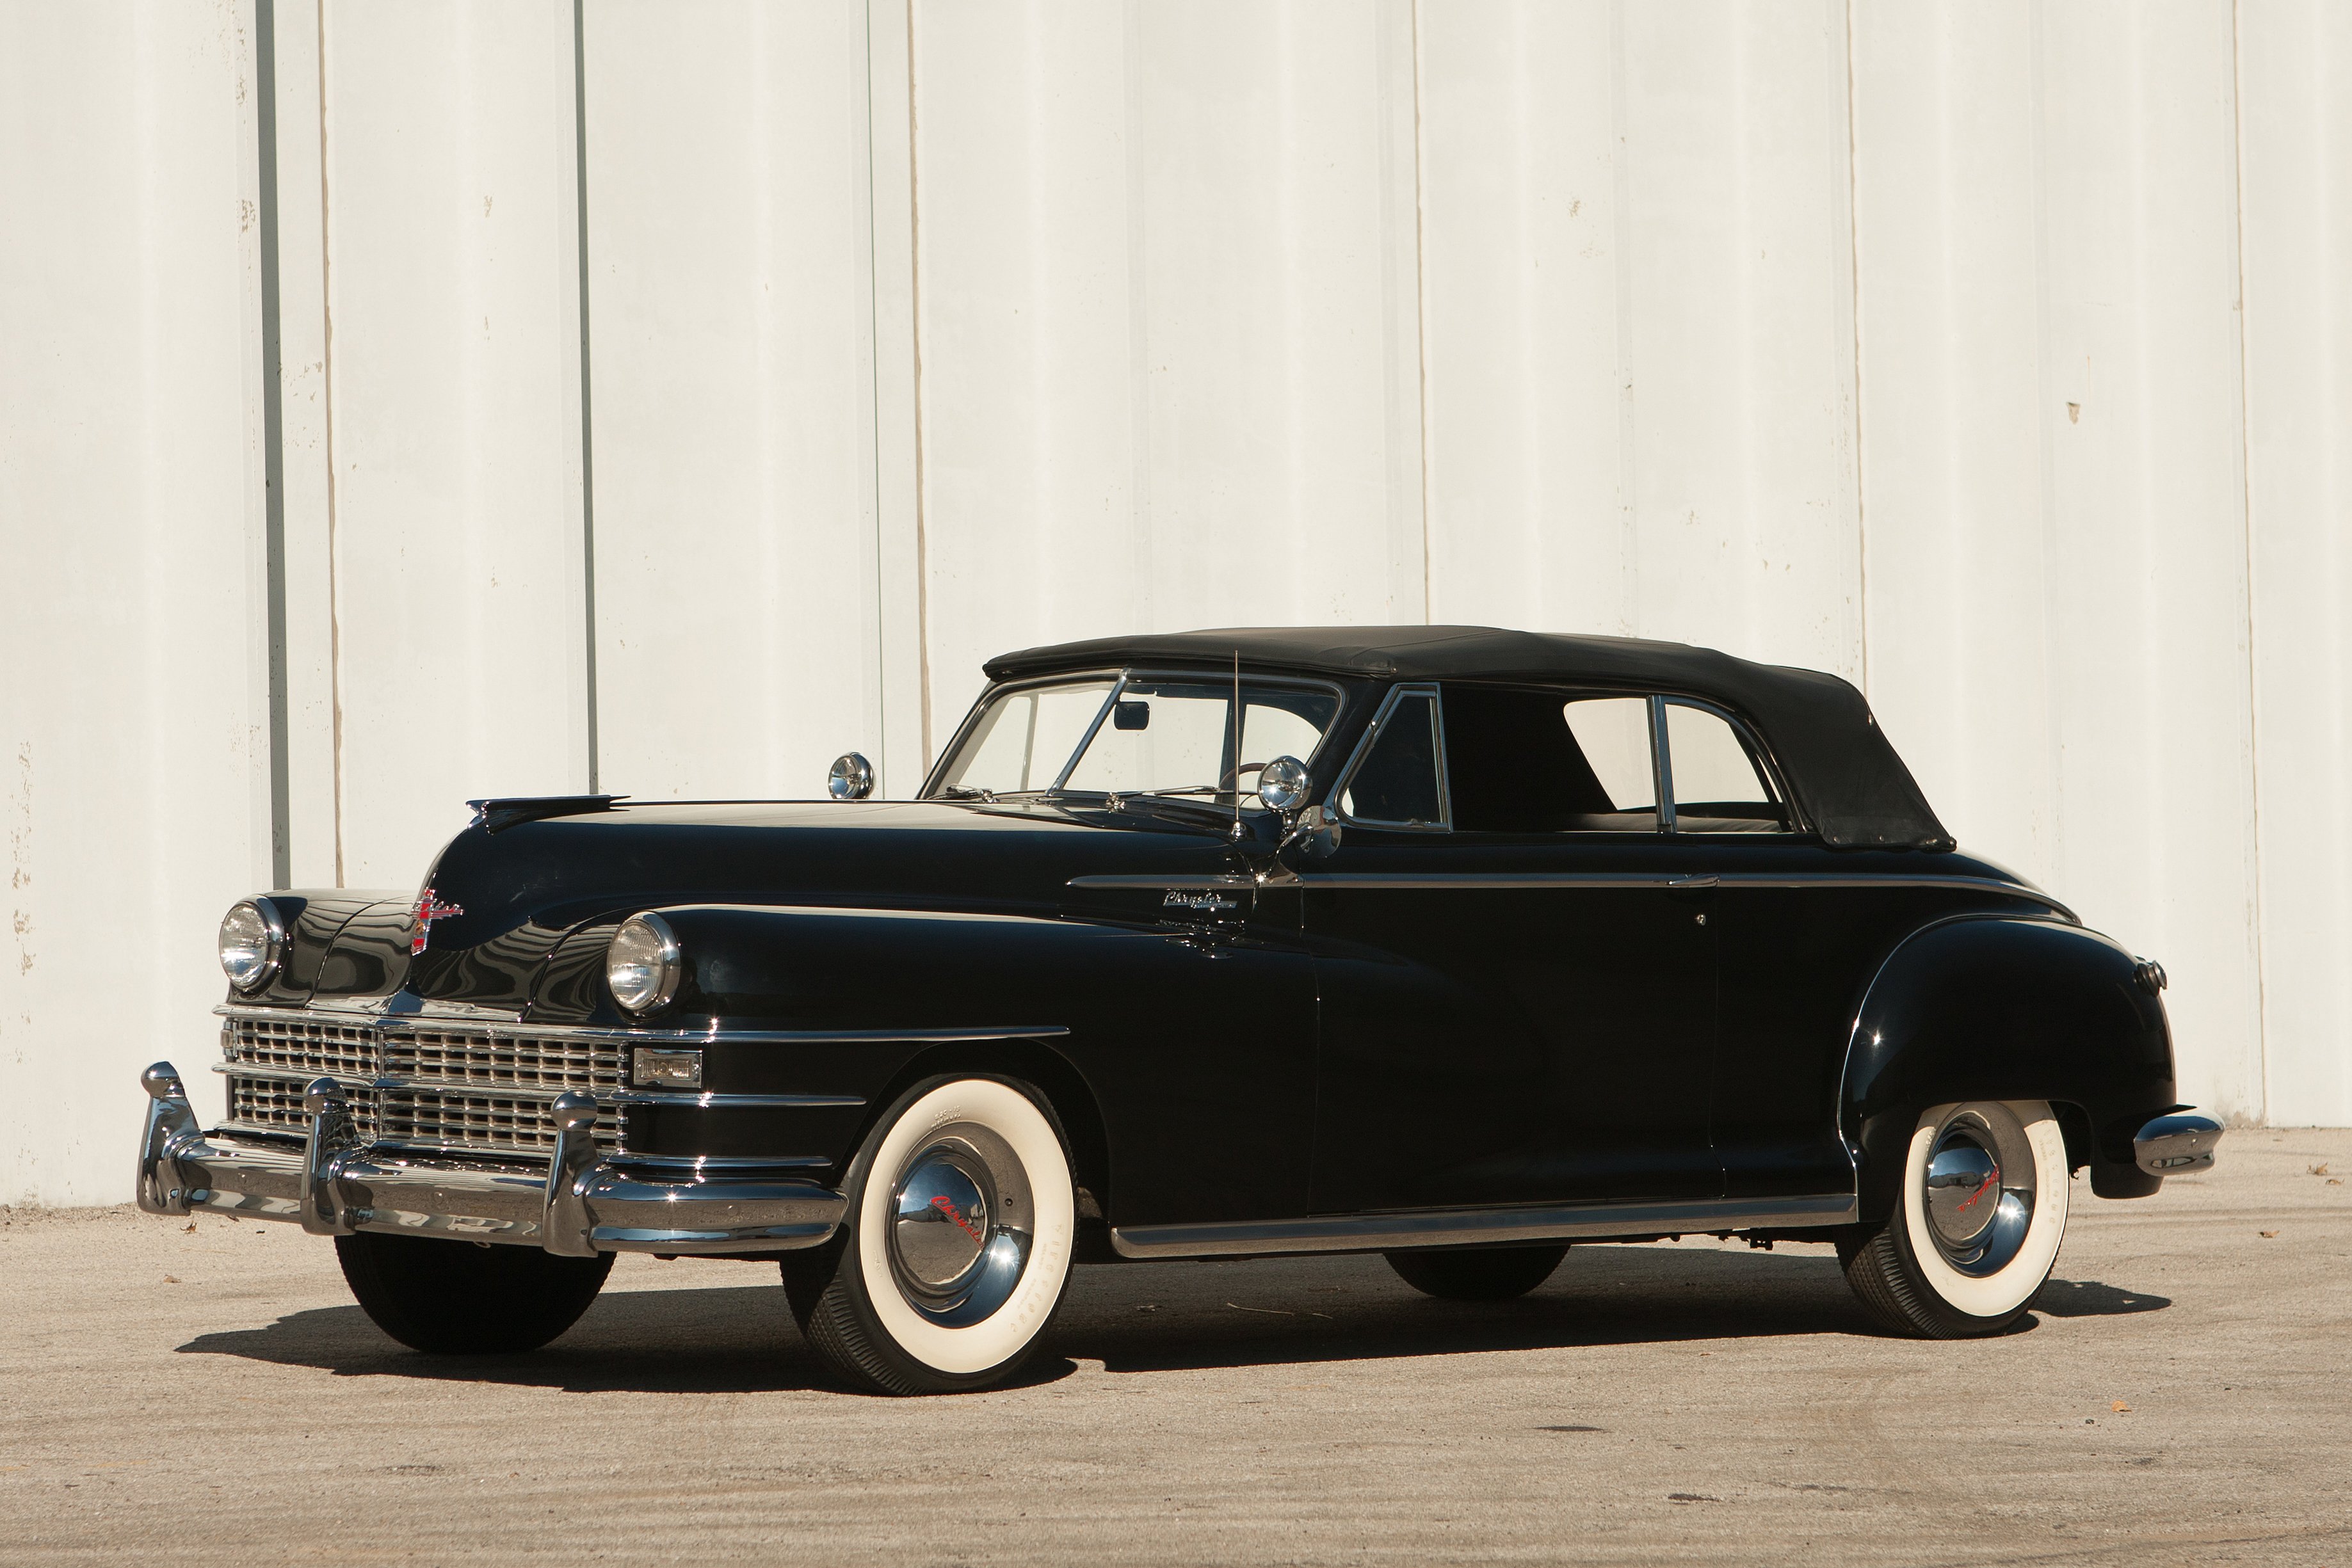 1948, Chrysler, New, Yorker, Convertible, Black, Classic, Old, Vintage, Usa, 3673x2449 01 Wallpaper